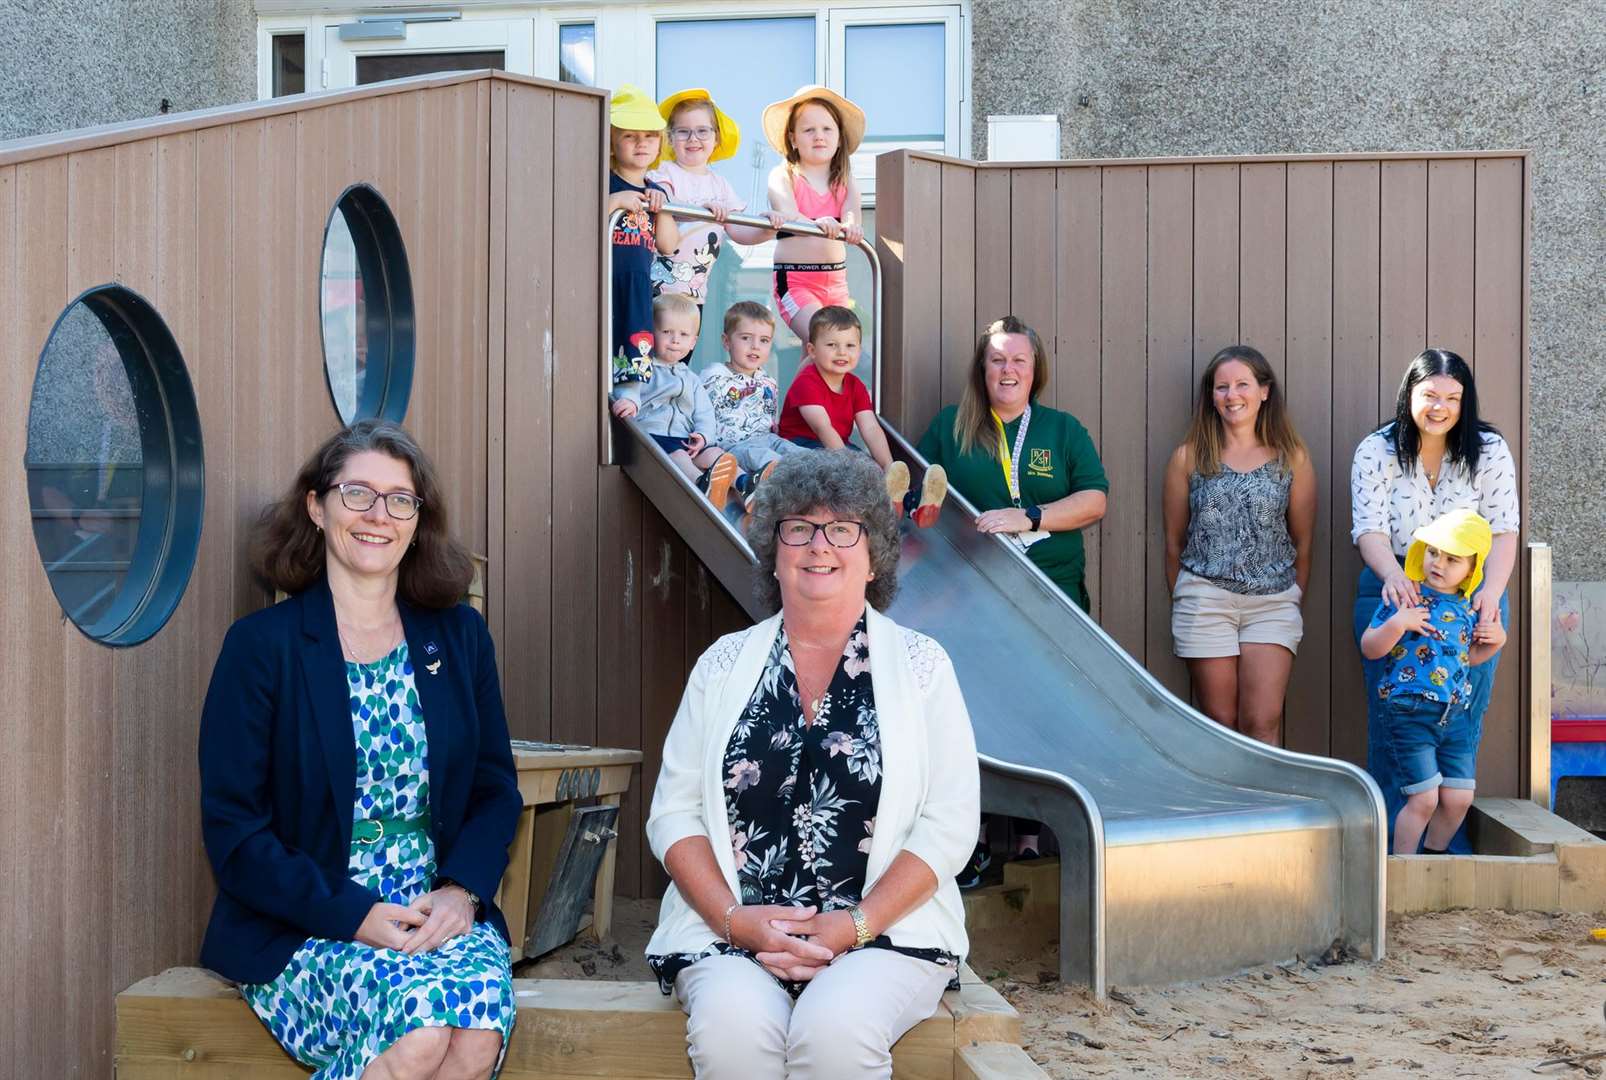 Councillor Rosemary Bruce (left) councillor Gillian Owen, Lisa Summers (Early Years Practitioner) and a selection of children, childminder Zoe Sadler and mum Rhona Hopkins at Buchanhaven Nursery, one of the settings in Aberdeenshire where the additional 1140 early learning and childcare hours are available.